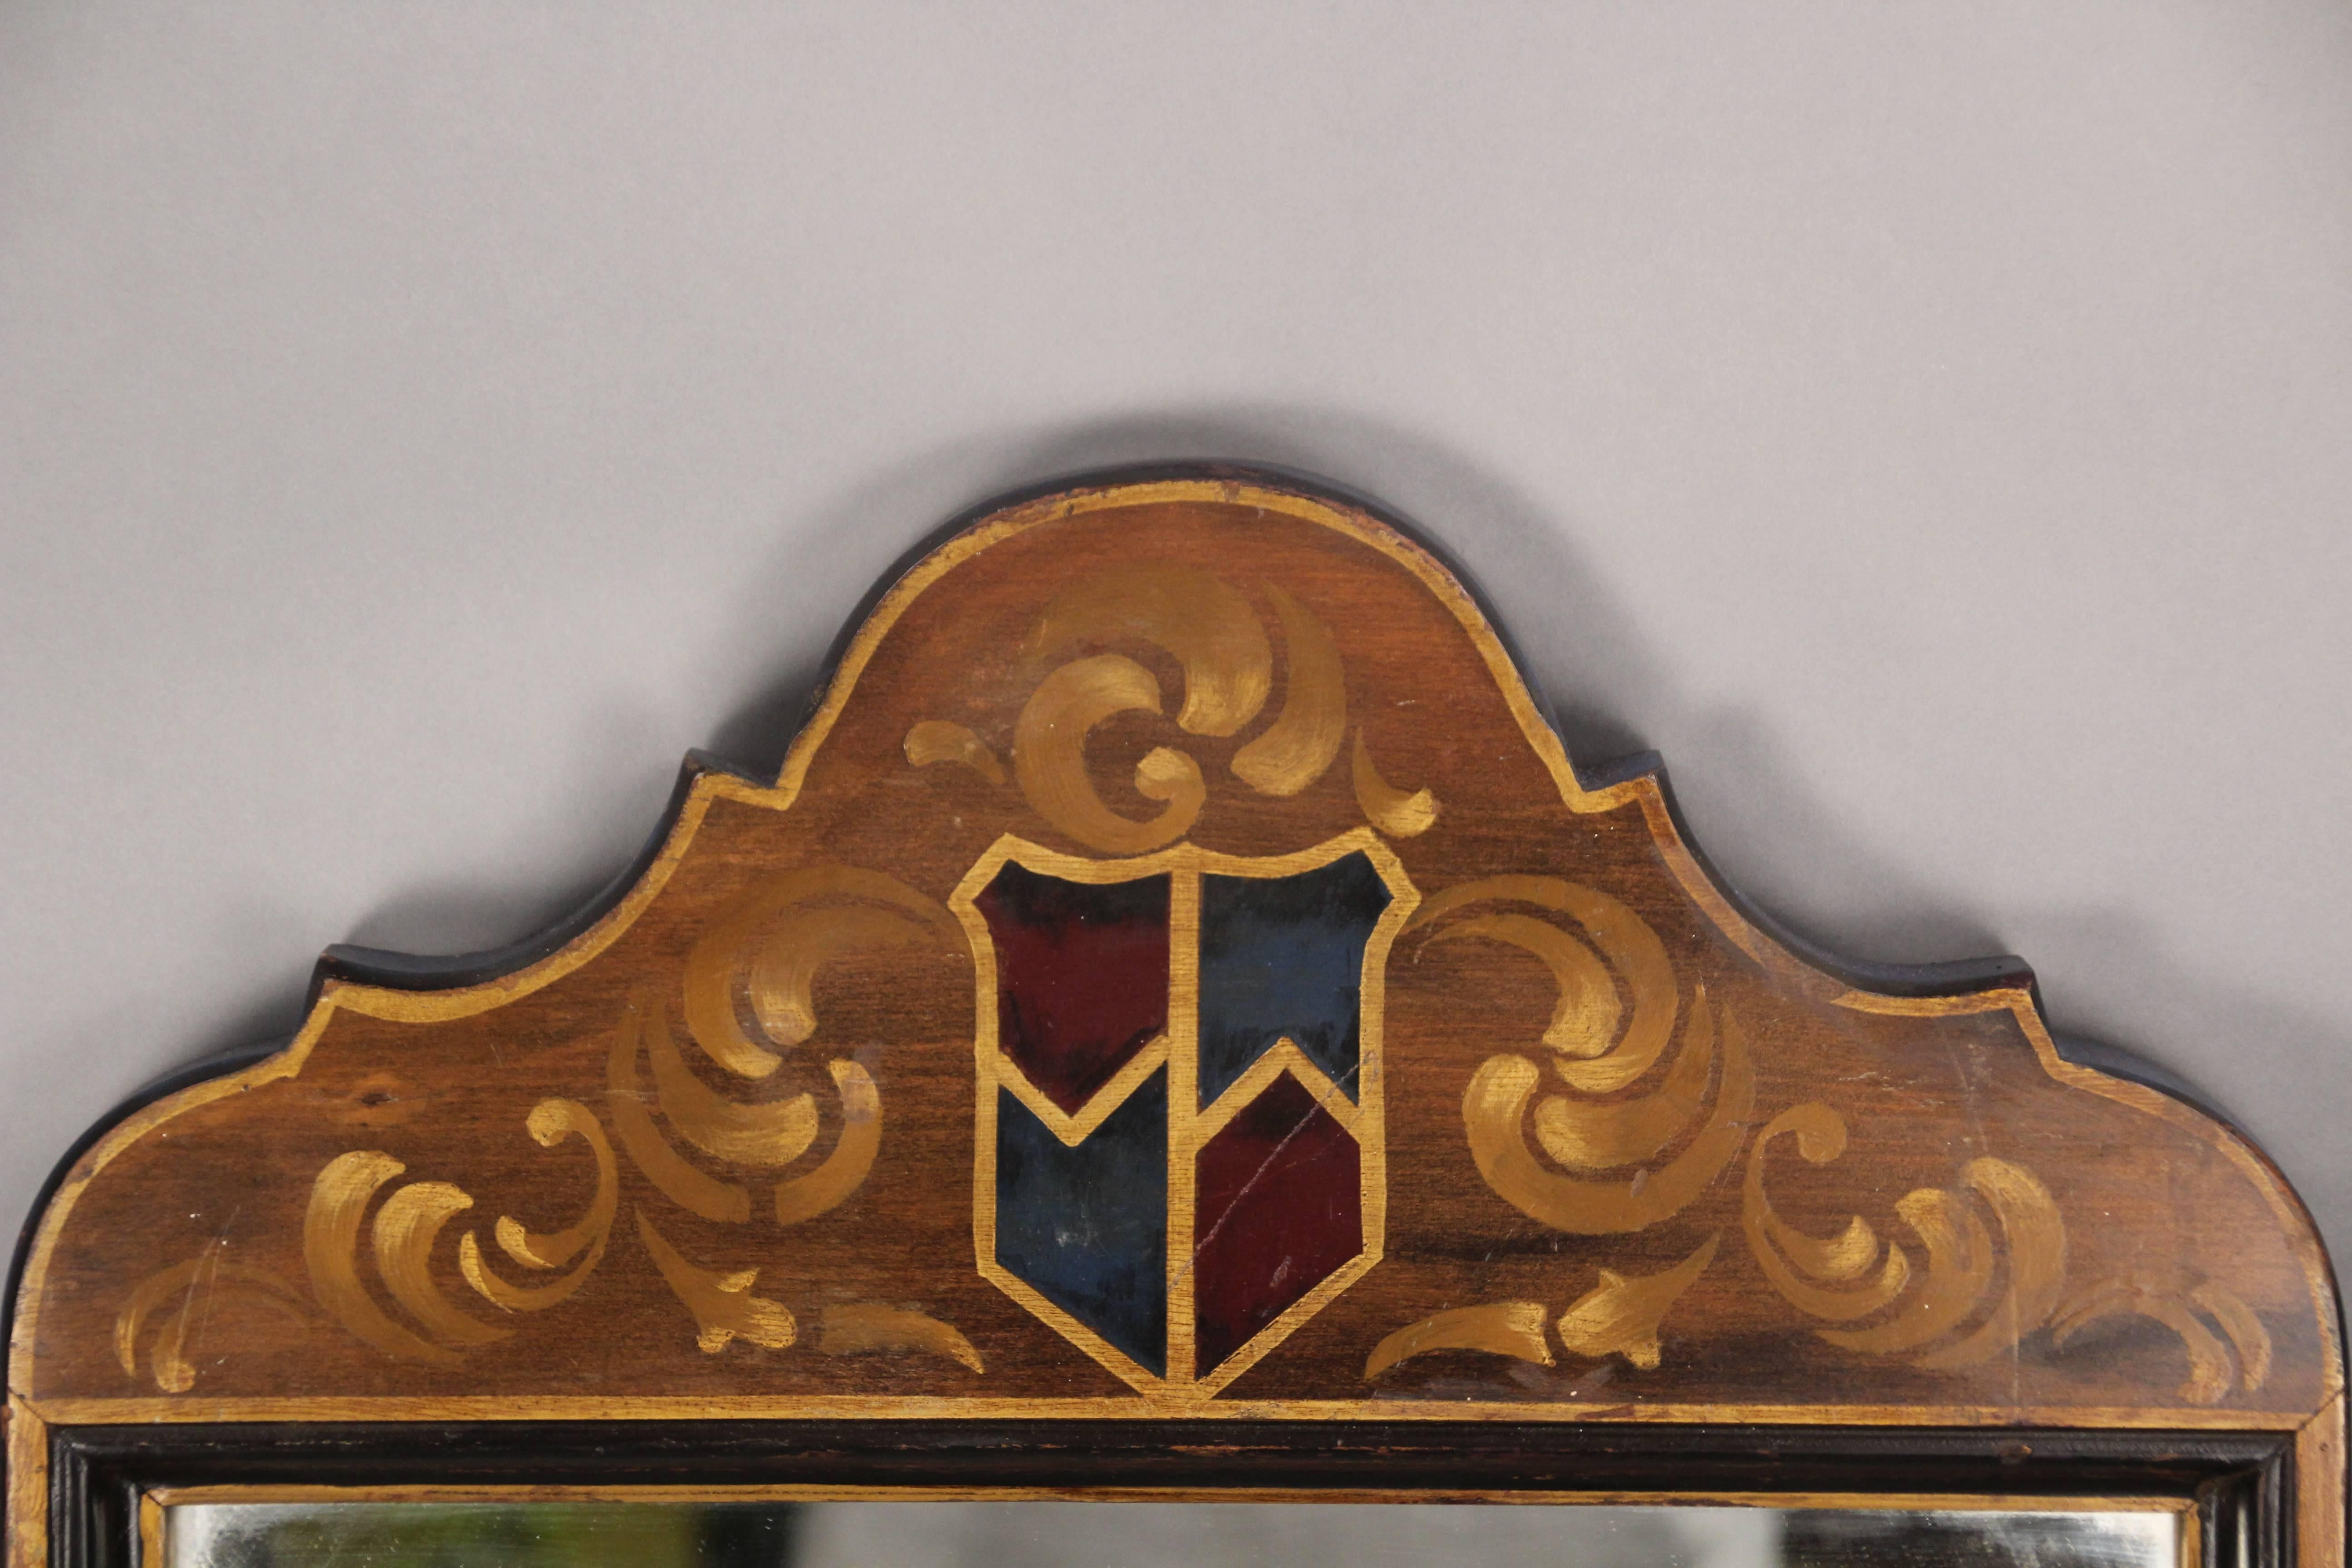 Tall mirror with hand-painted crest details, circa 1920s.